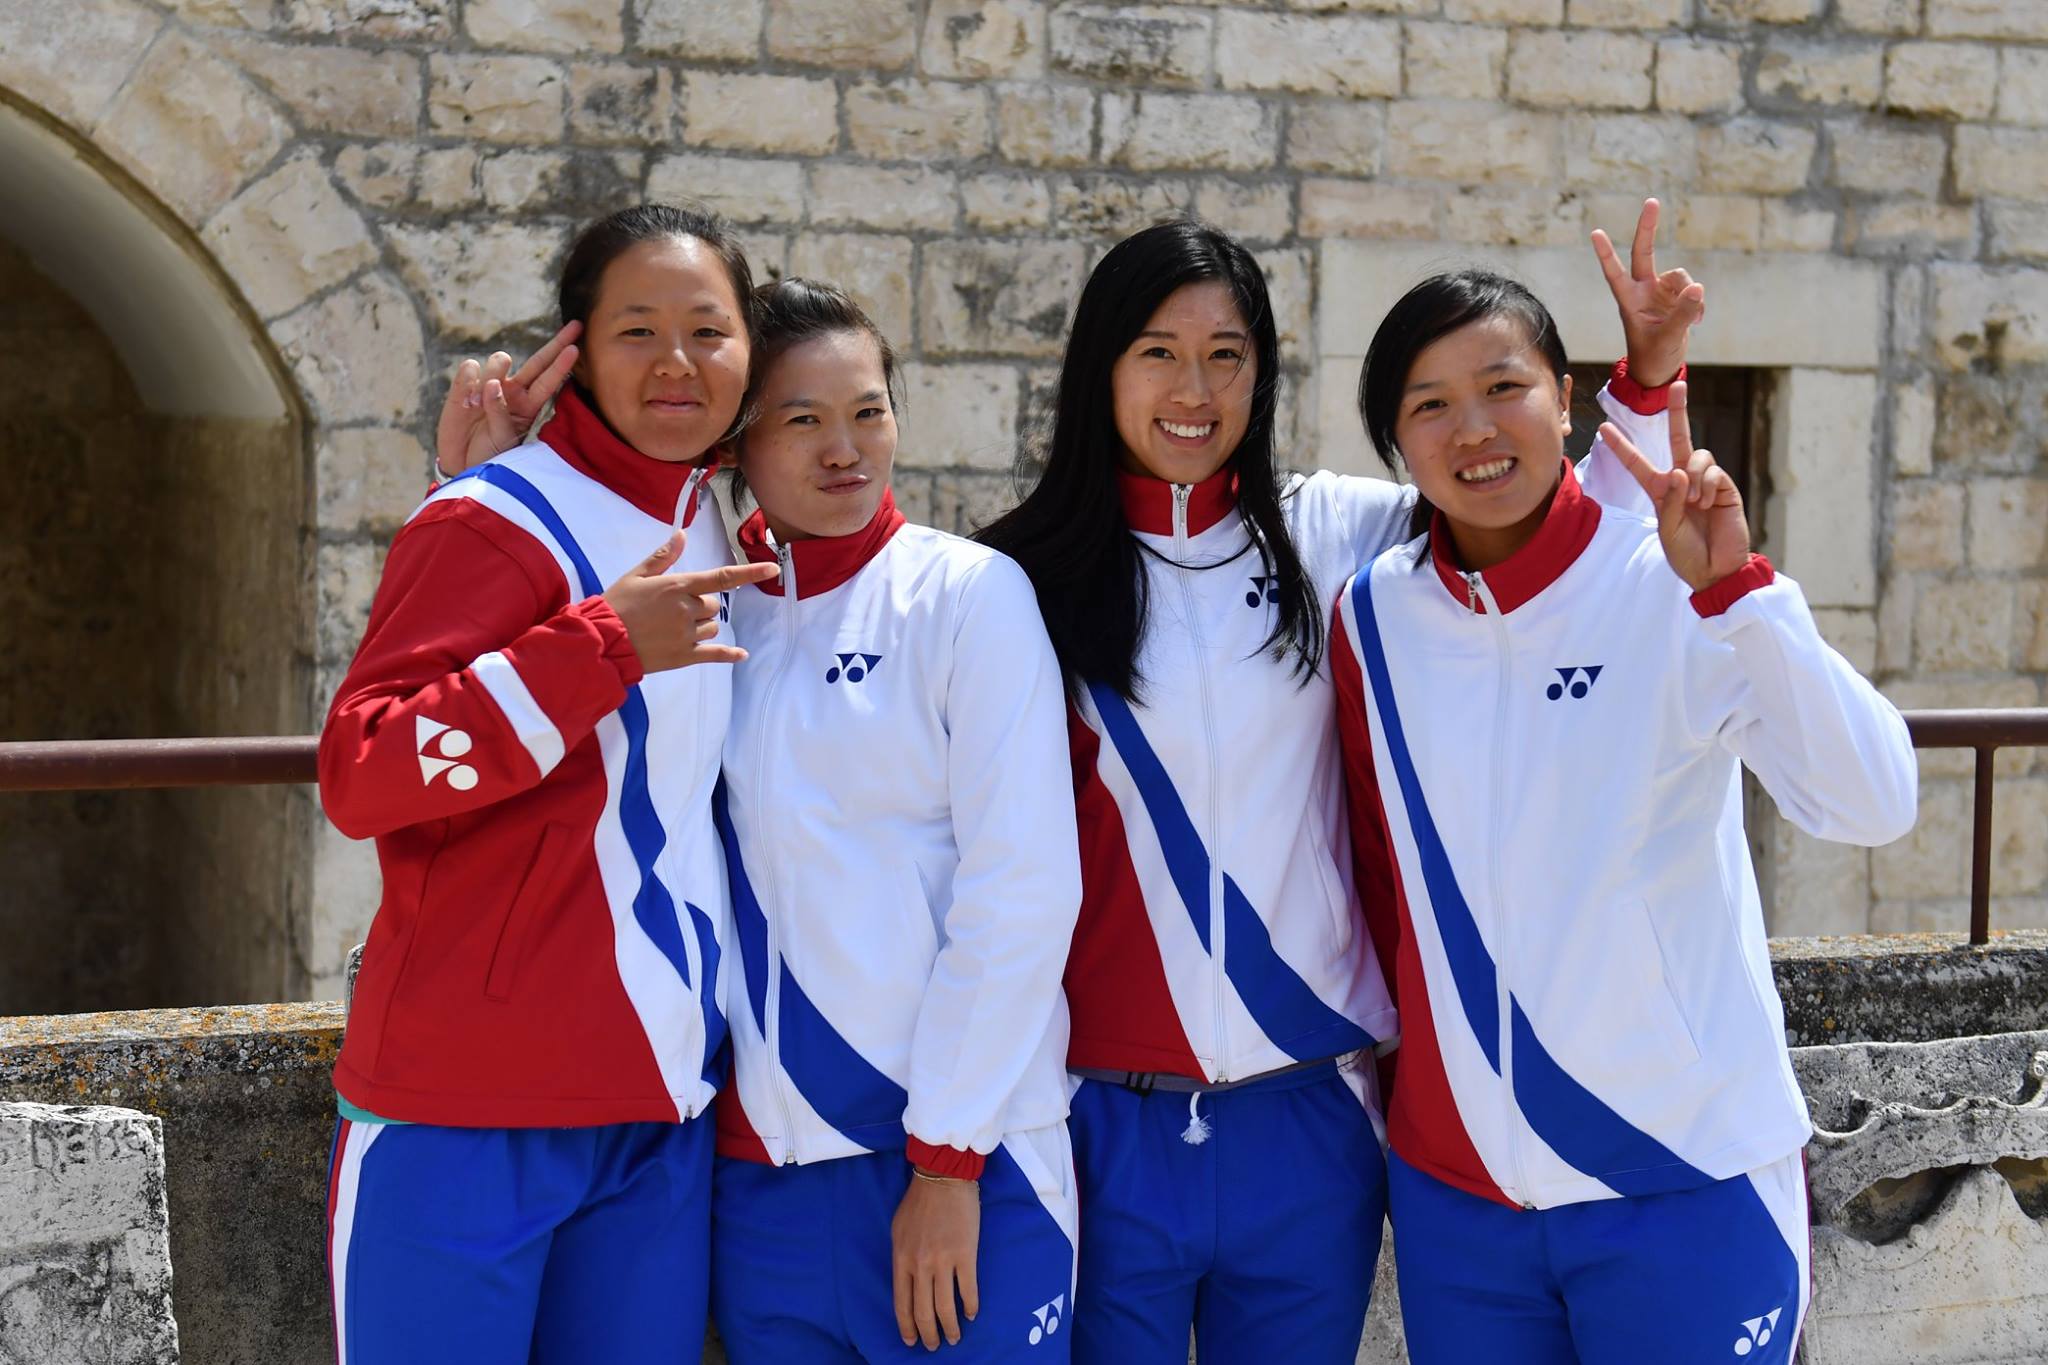 fed cup (1)